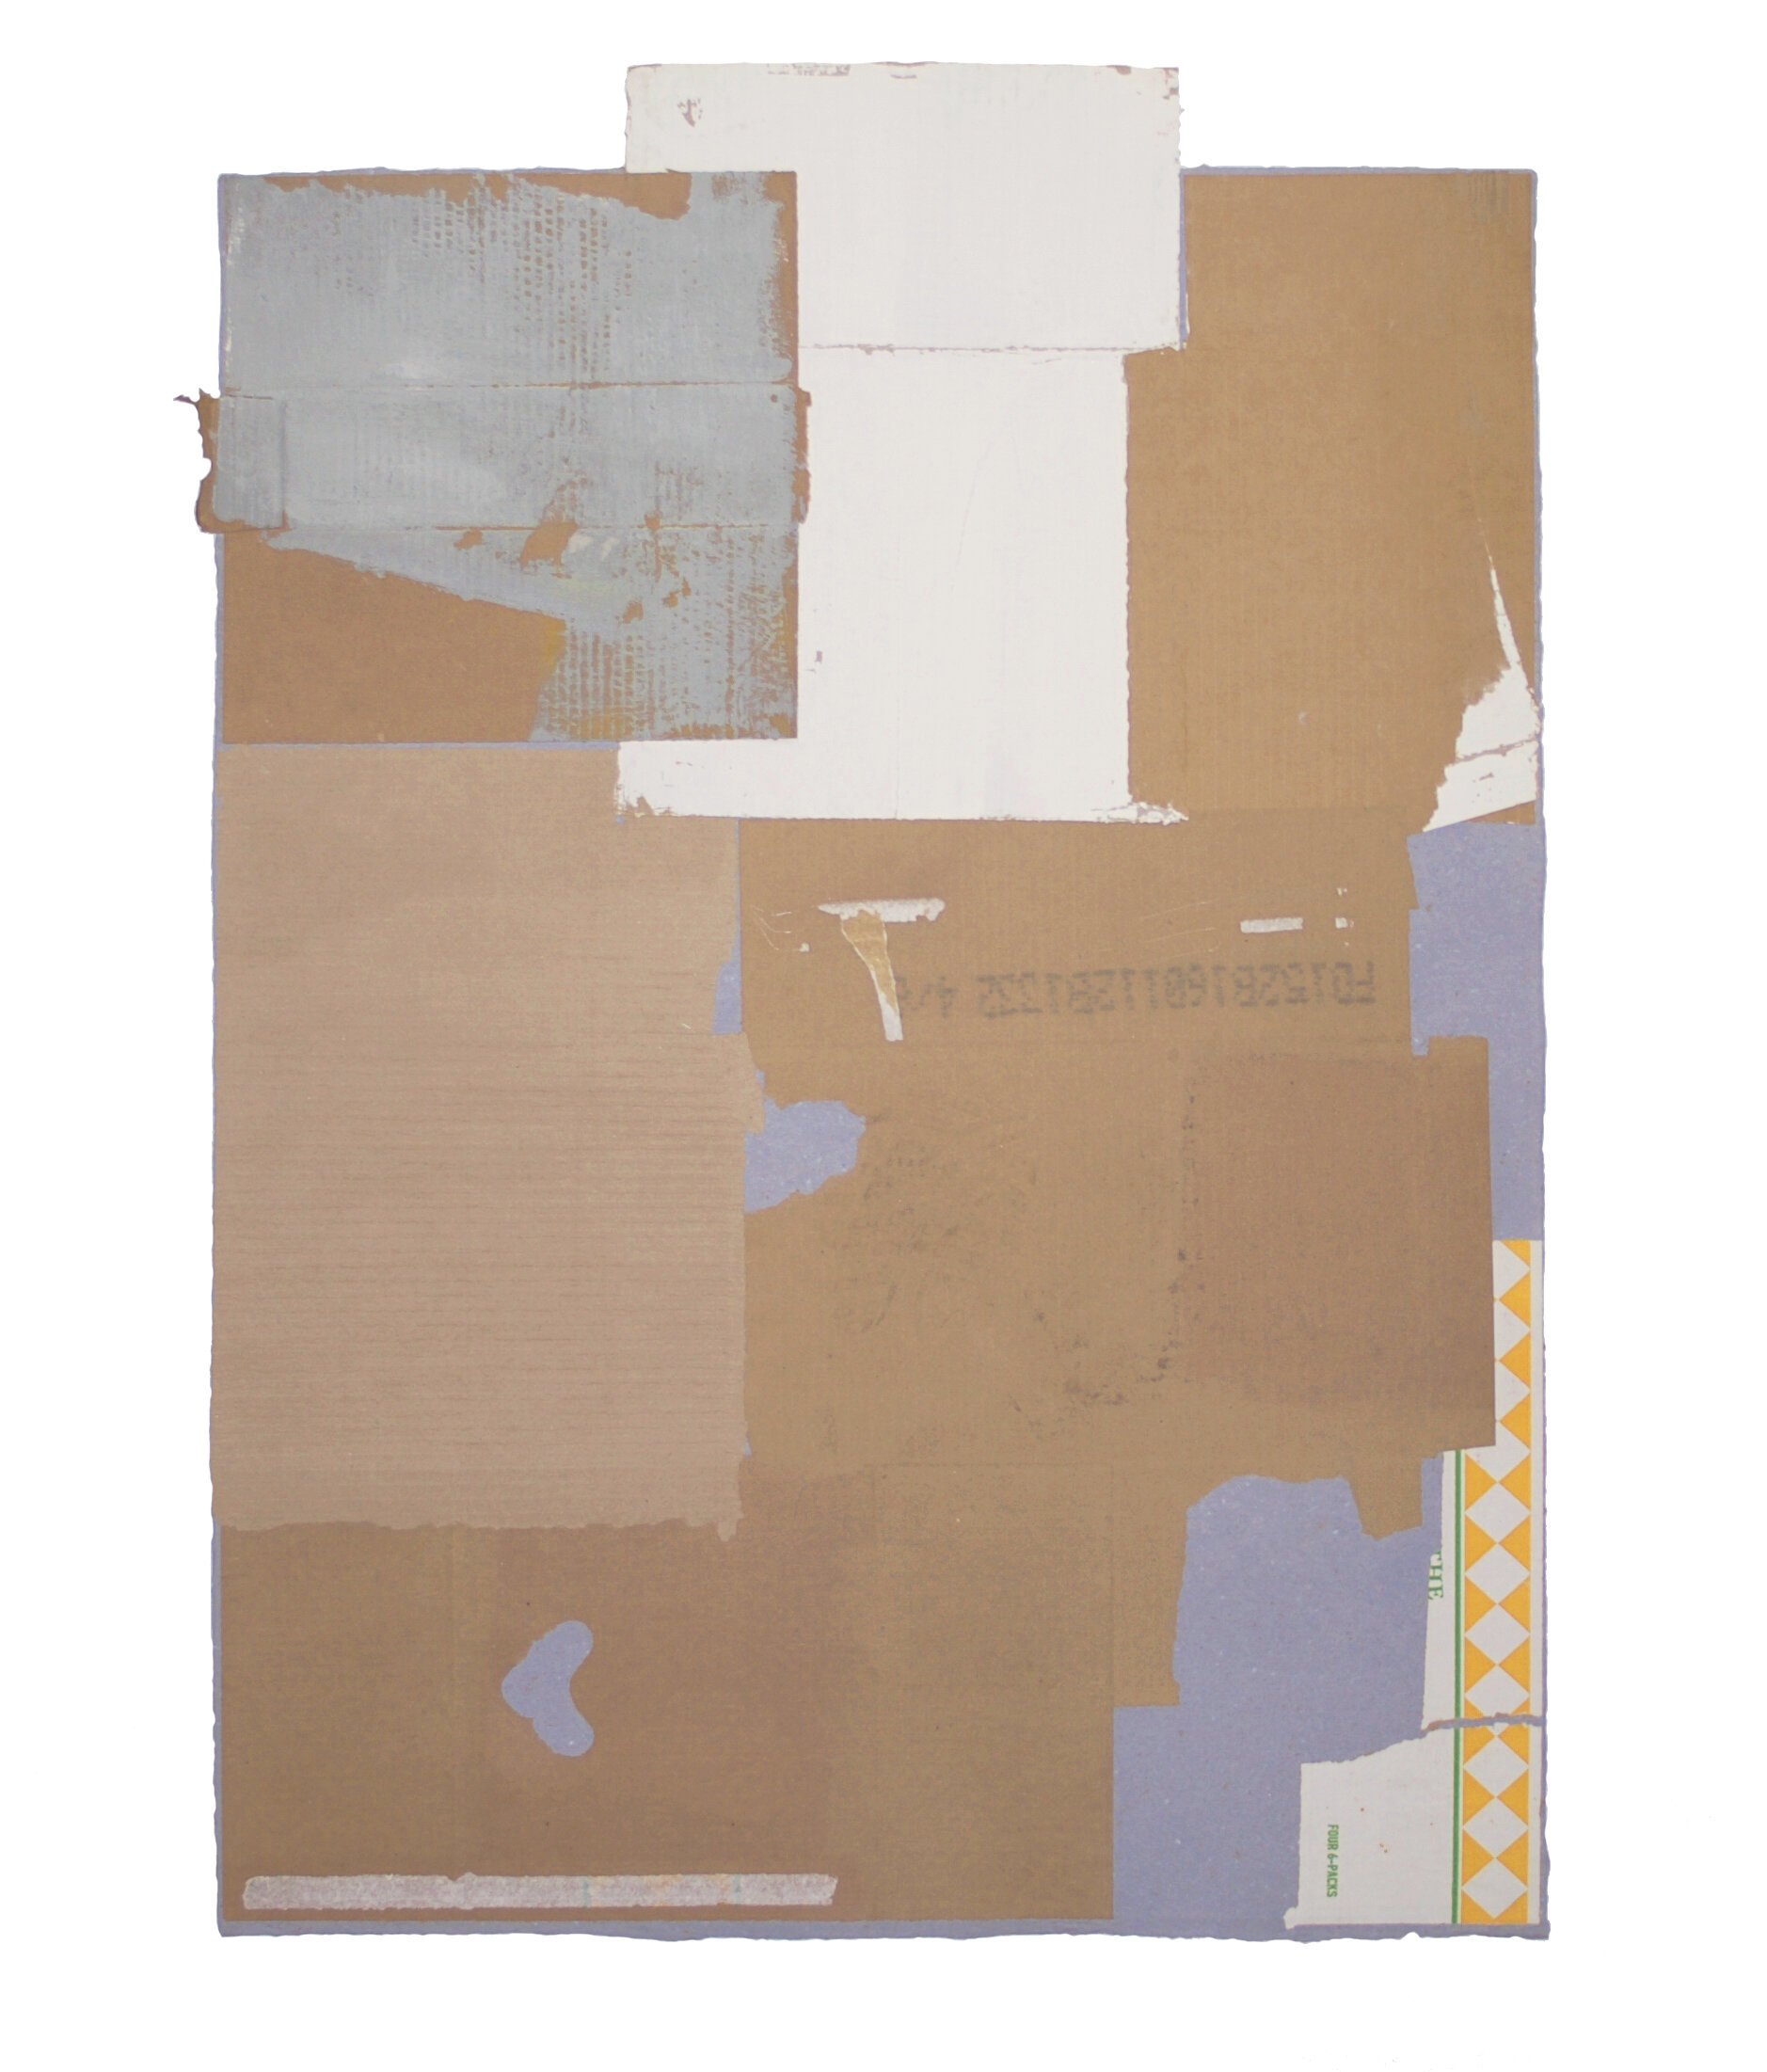  Lisa Sigal, Curbside (Meditation Mat), 2016   Lisa Sigal   Curbside (Meditation Mat) , 2016 Painted cardboard collage on pigmented cotton backing sheet 40 x 30 inches 